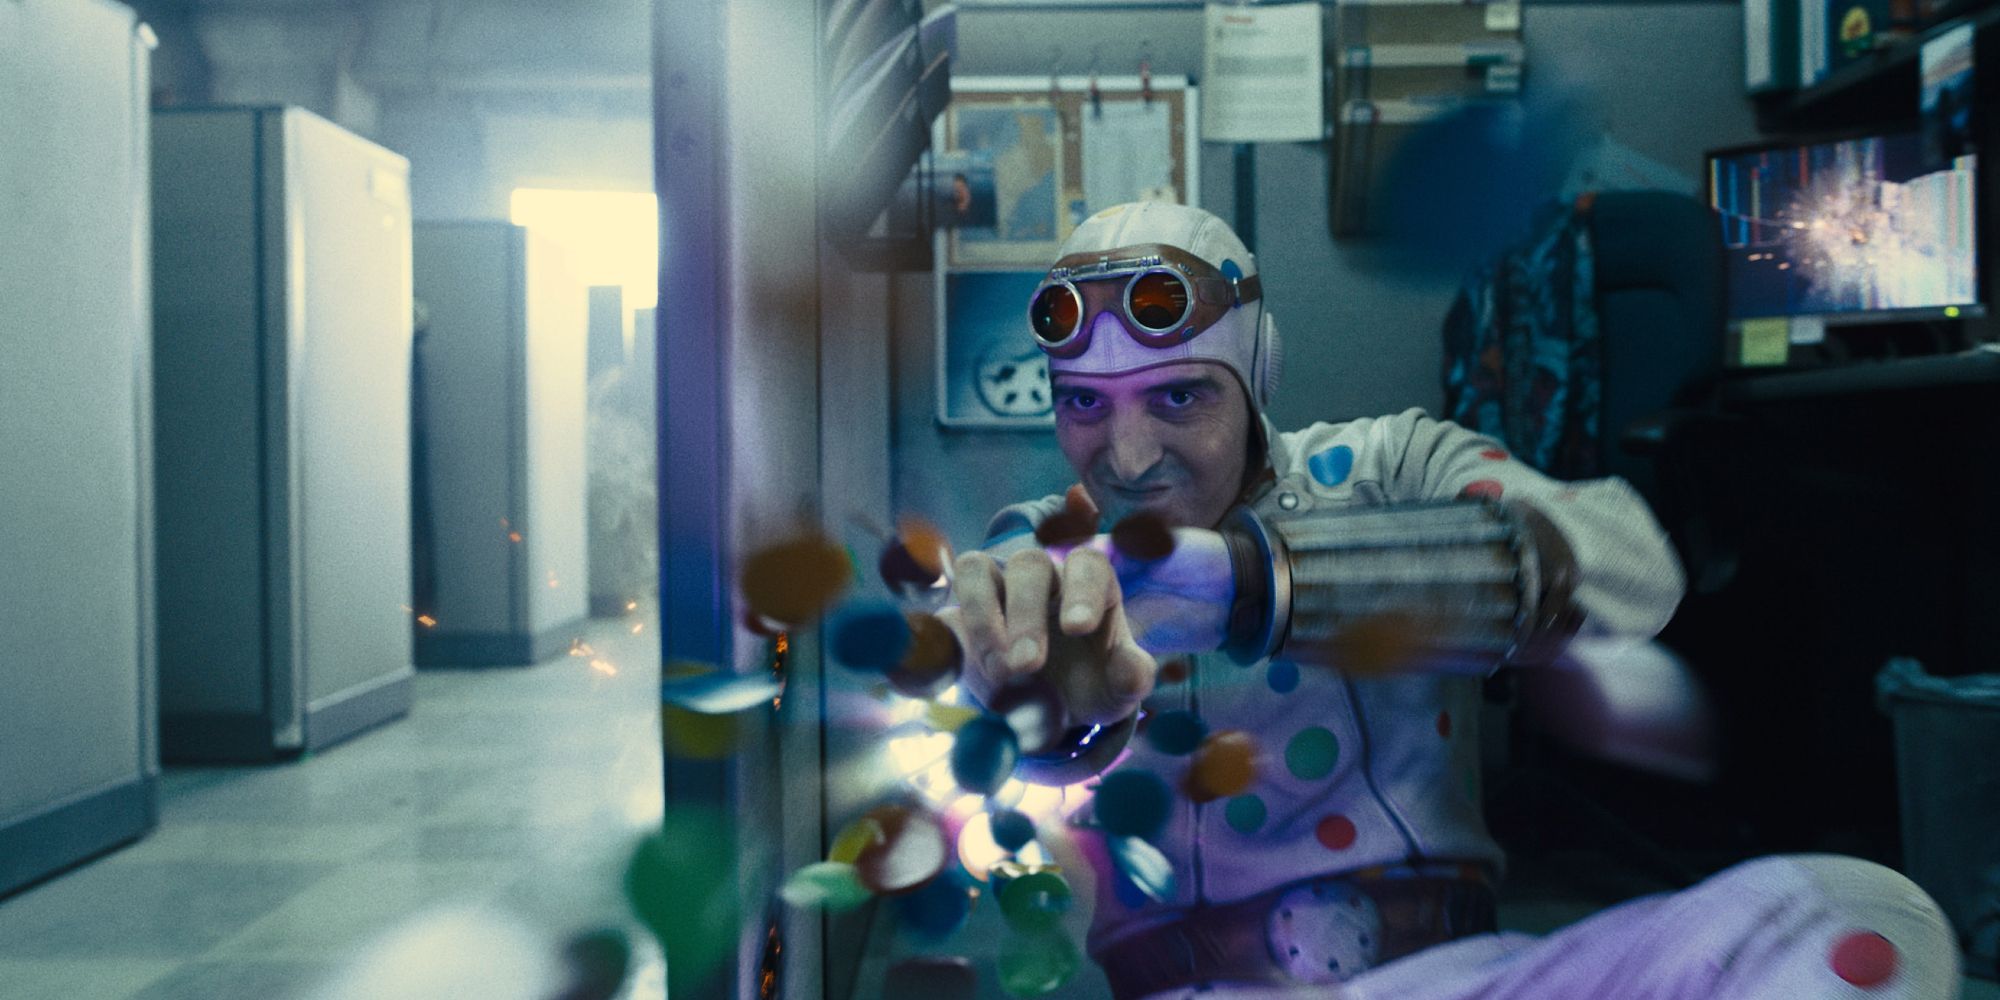 Polka Dot Man fires polka dots in an office In The Suicide Squad